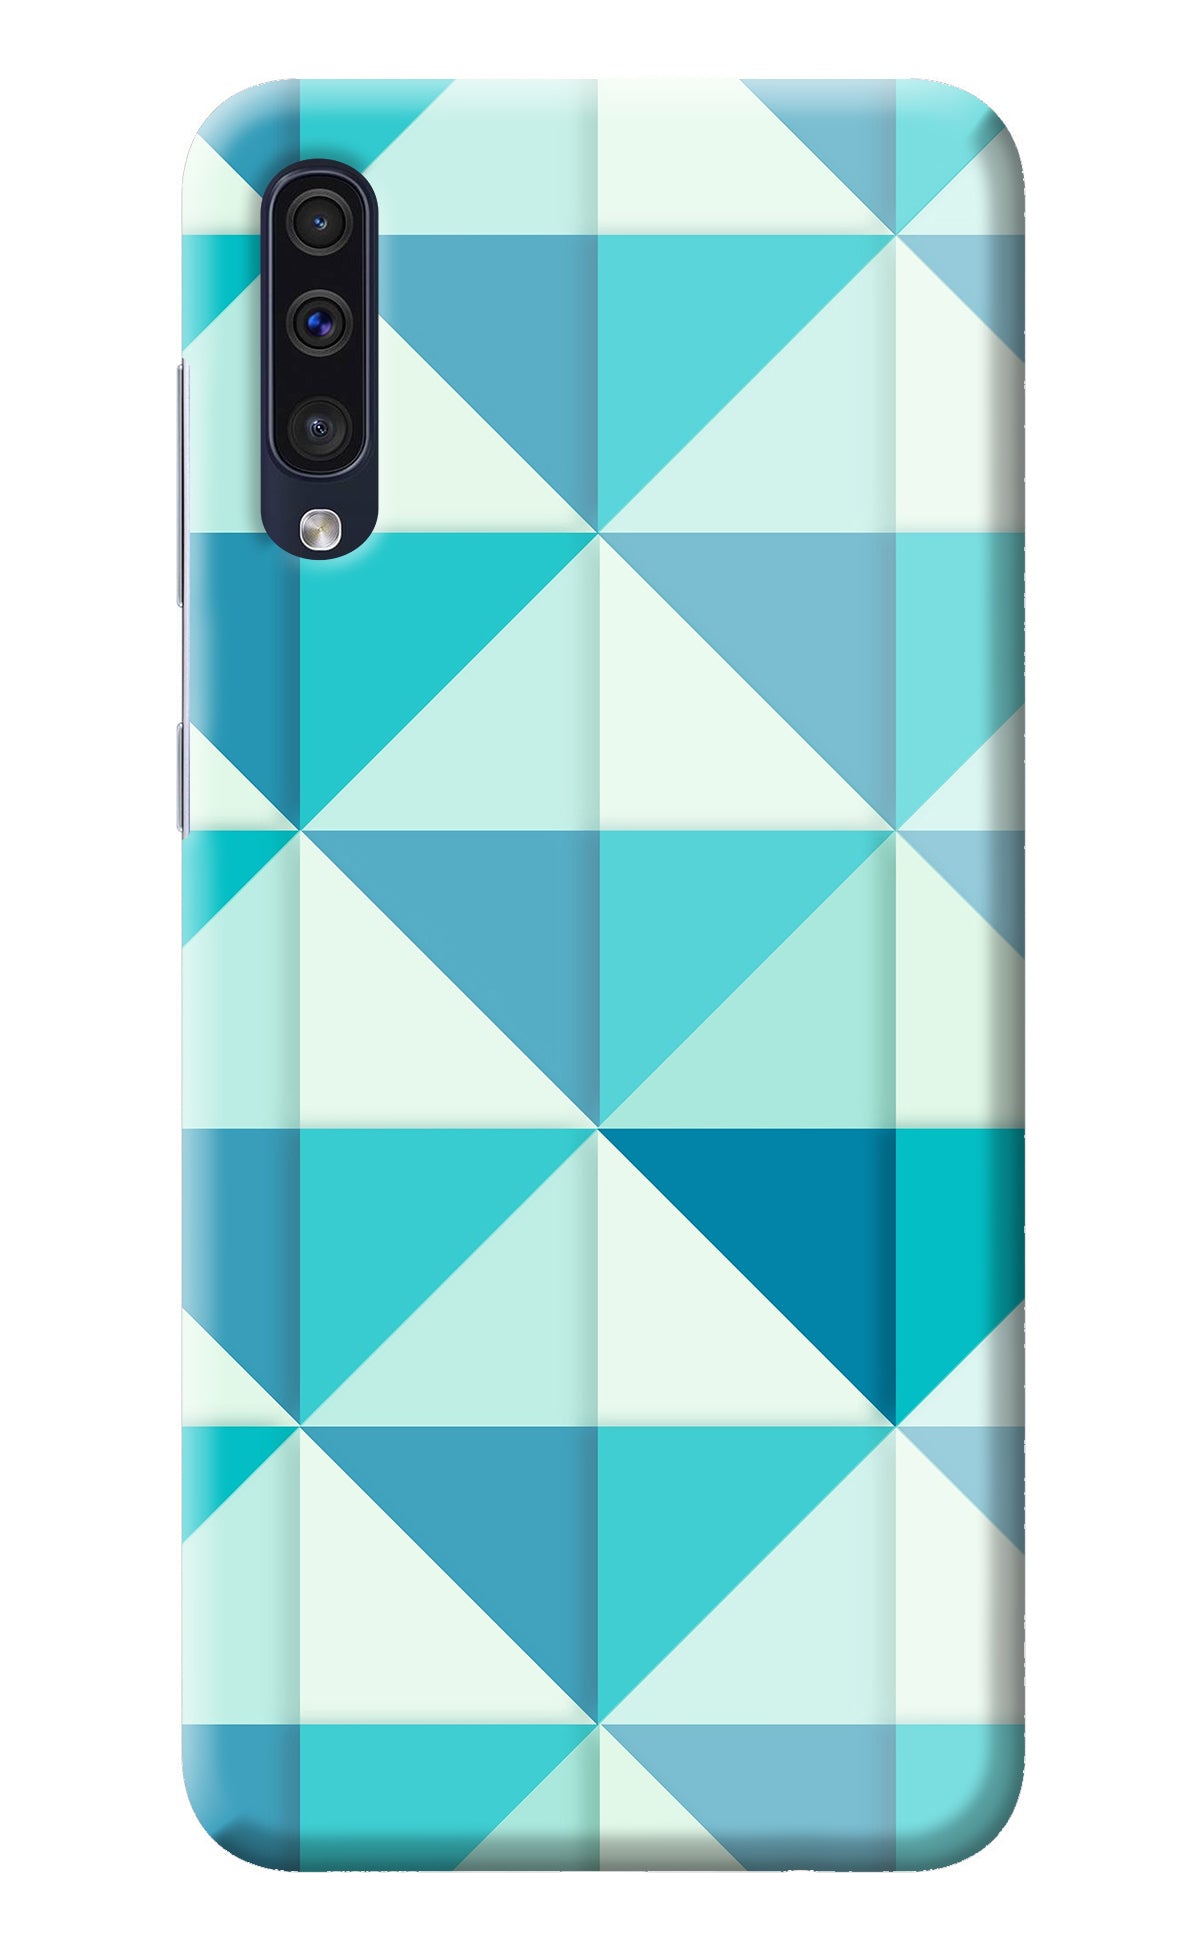 Abstract Samsung A50/A50s/A30s Back Cover